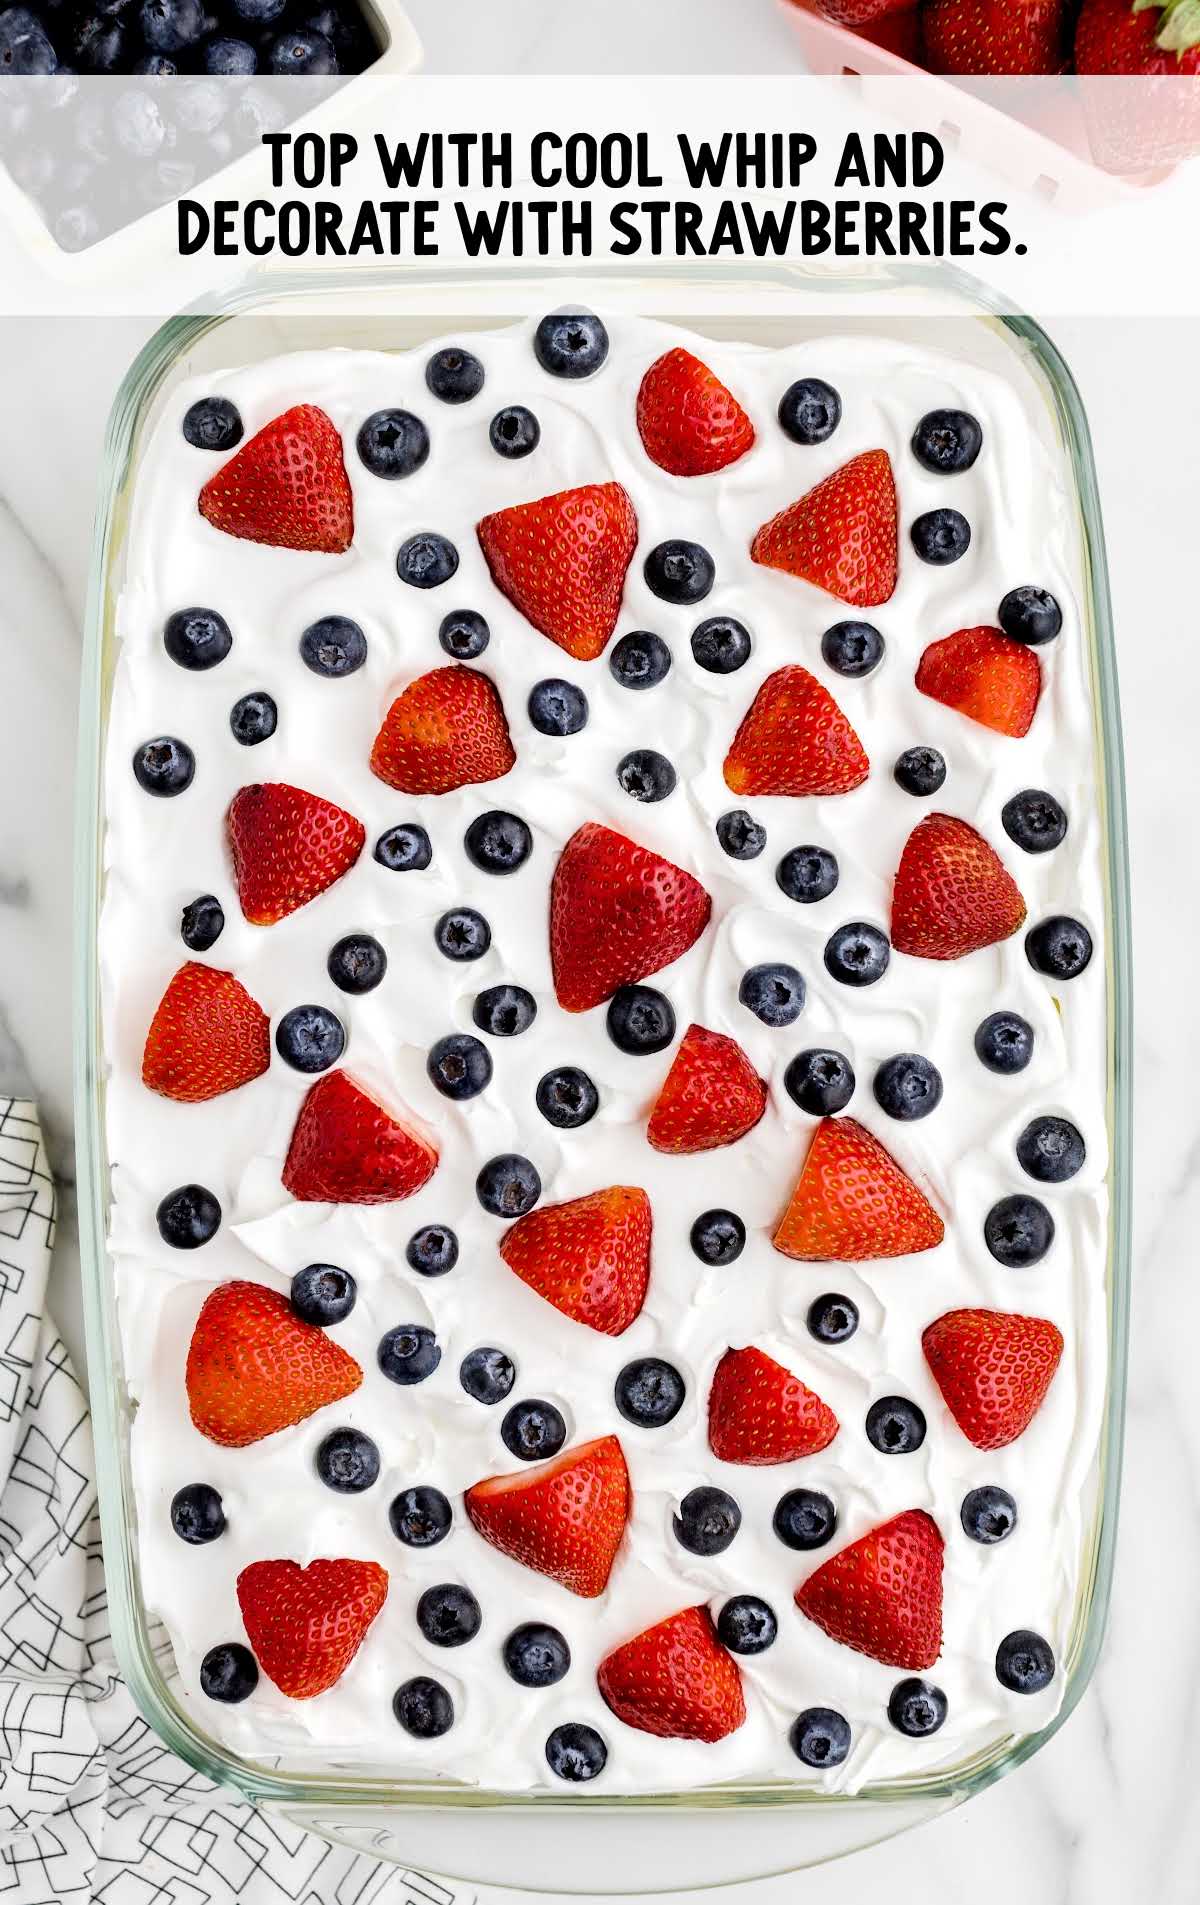 cake topped with cool whip and decorated with strawberries in a baking dish